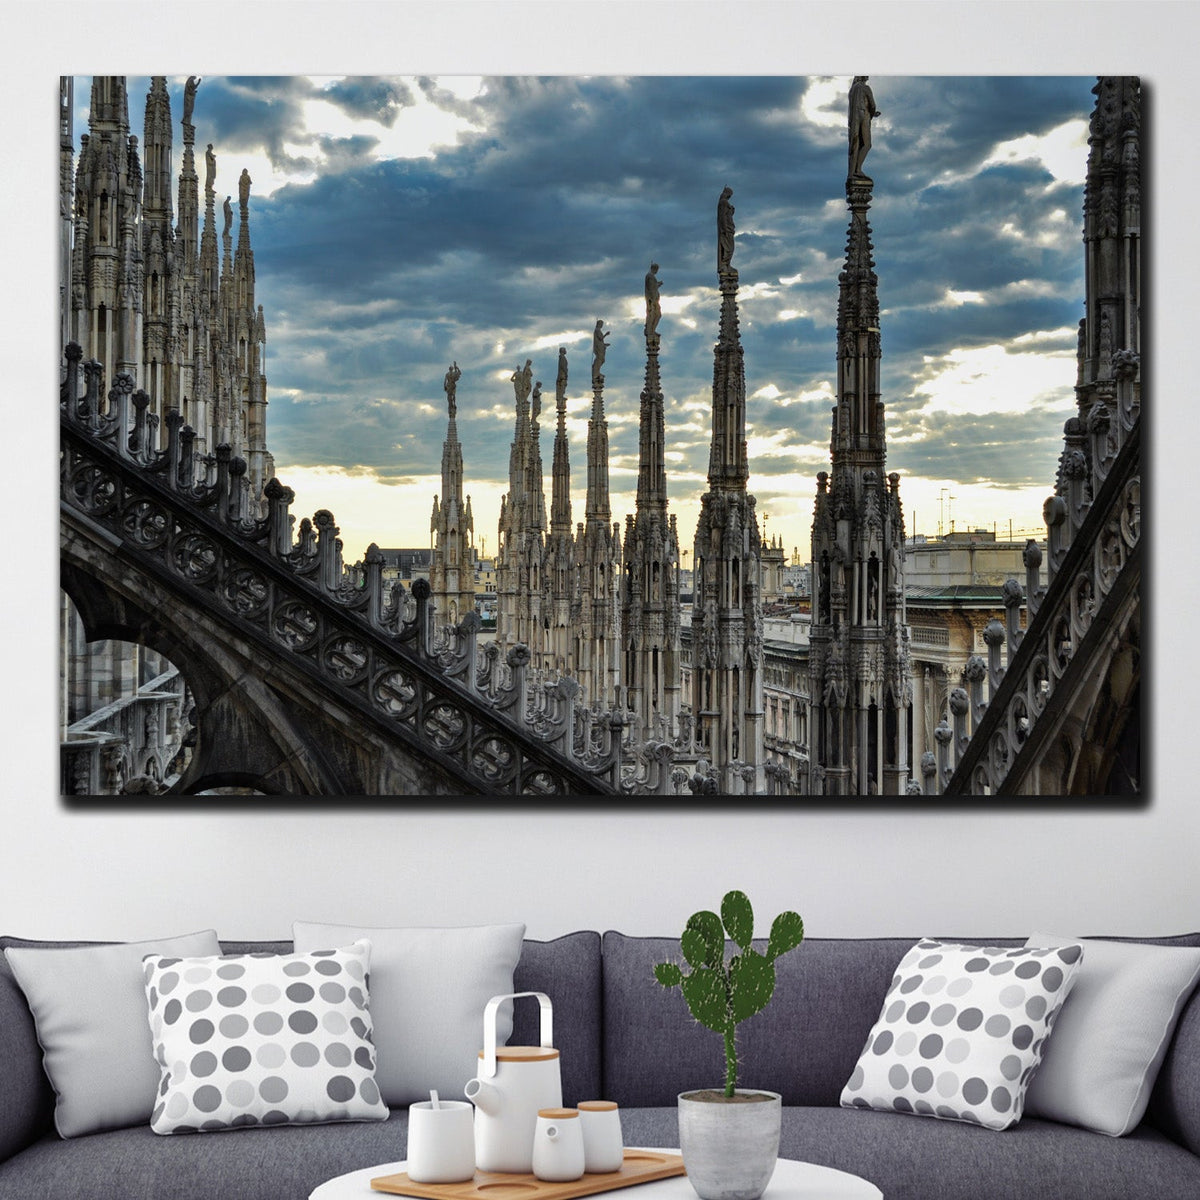 https://cdn.shopify.com/s/files/1/0387/9986/8044/products/RoofTerracesofCathedralDuomoCanvasArtprintStretched-3.jpg